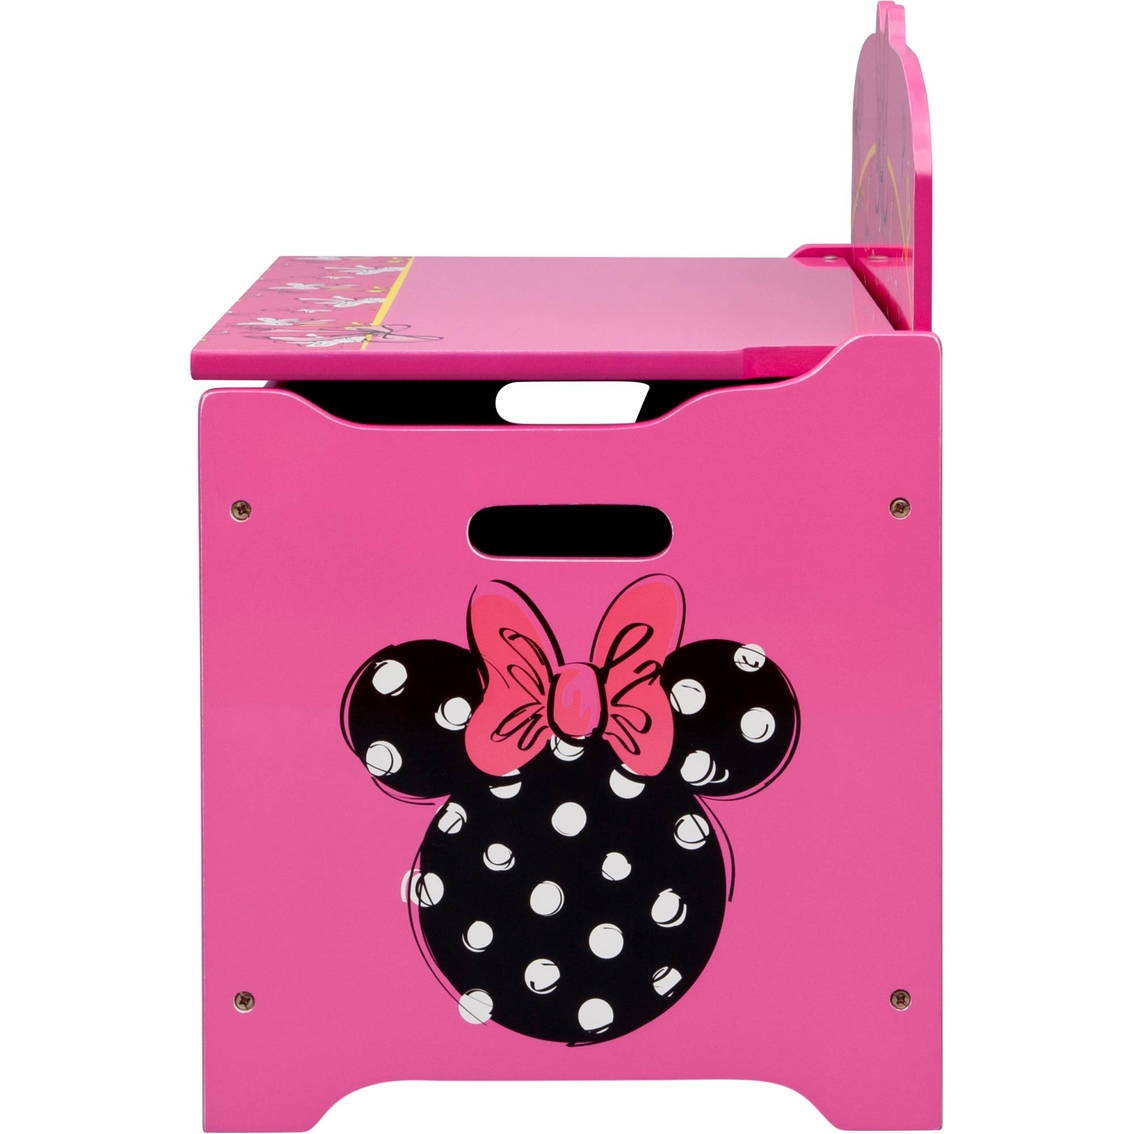 Disney Minnie Mouse Deluxe Toy Box - Image 3 of 4